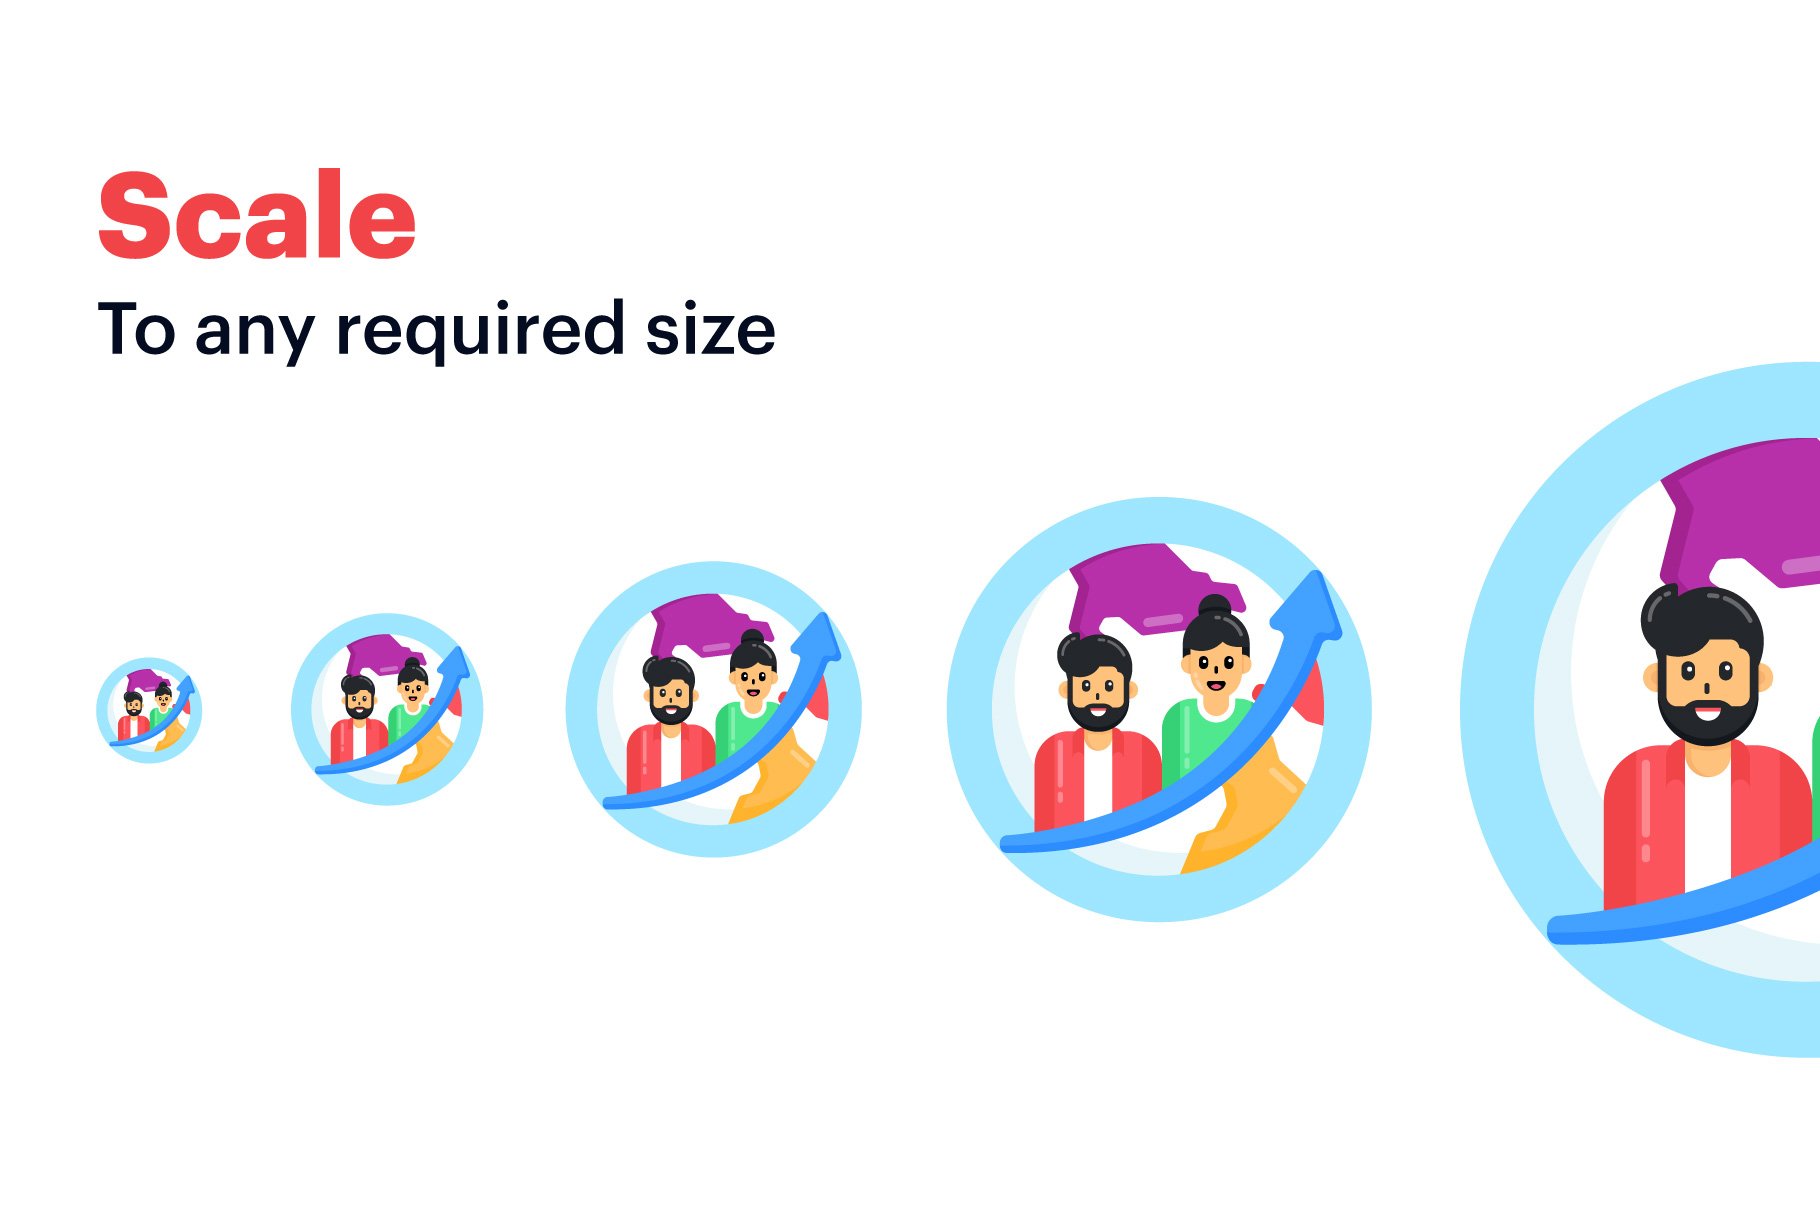 Scale these icons to any required sizes.